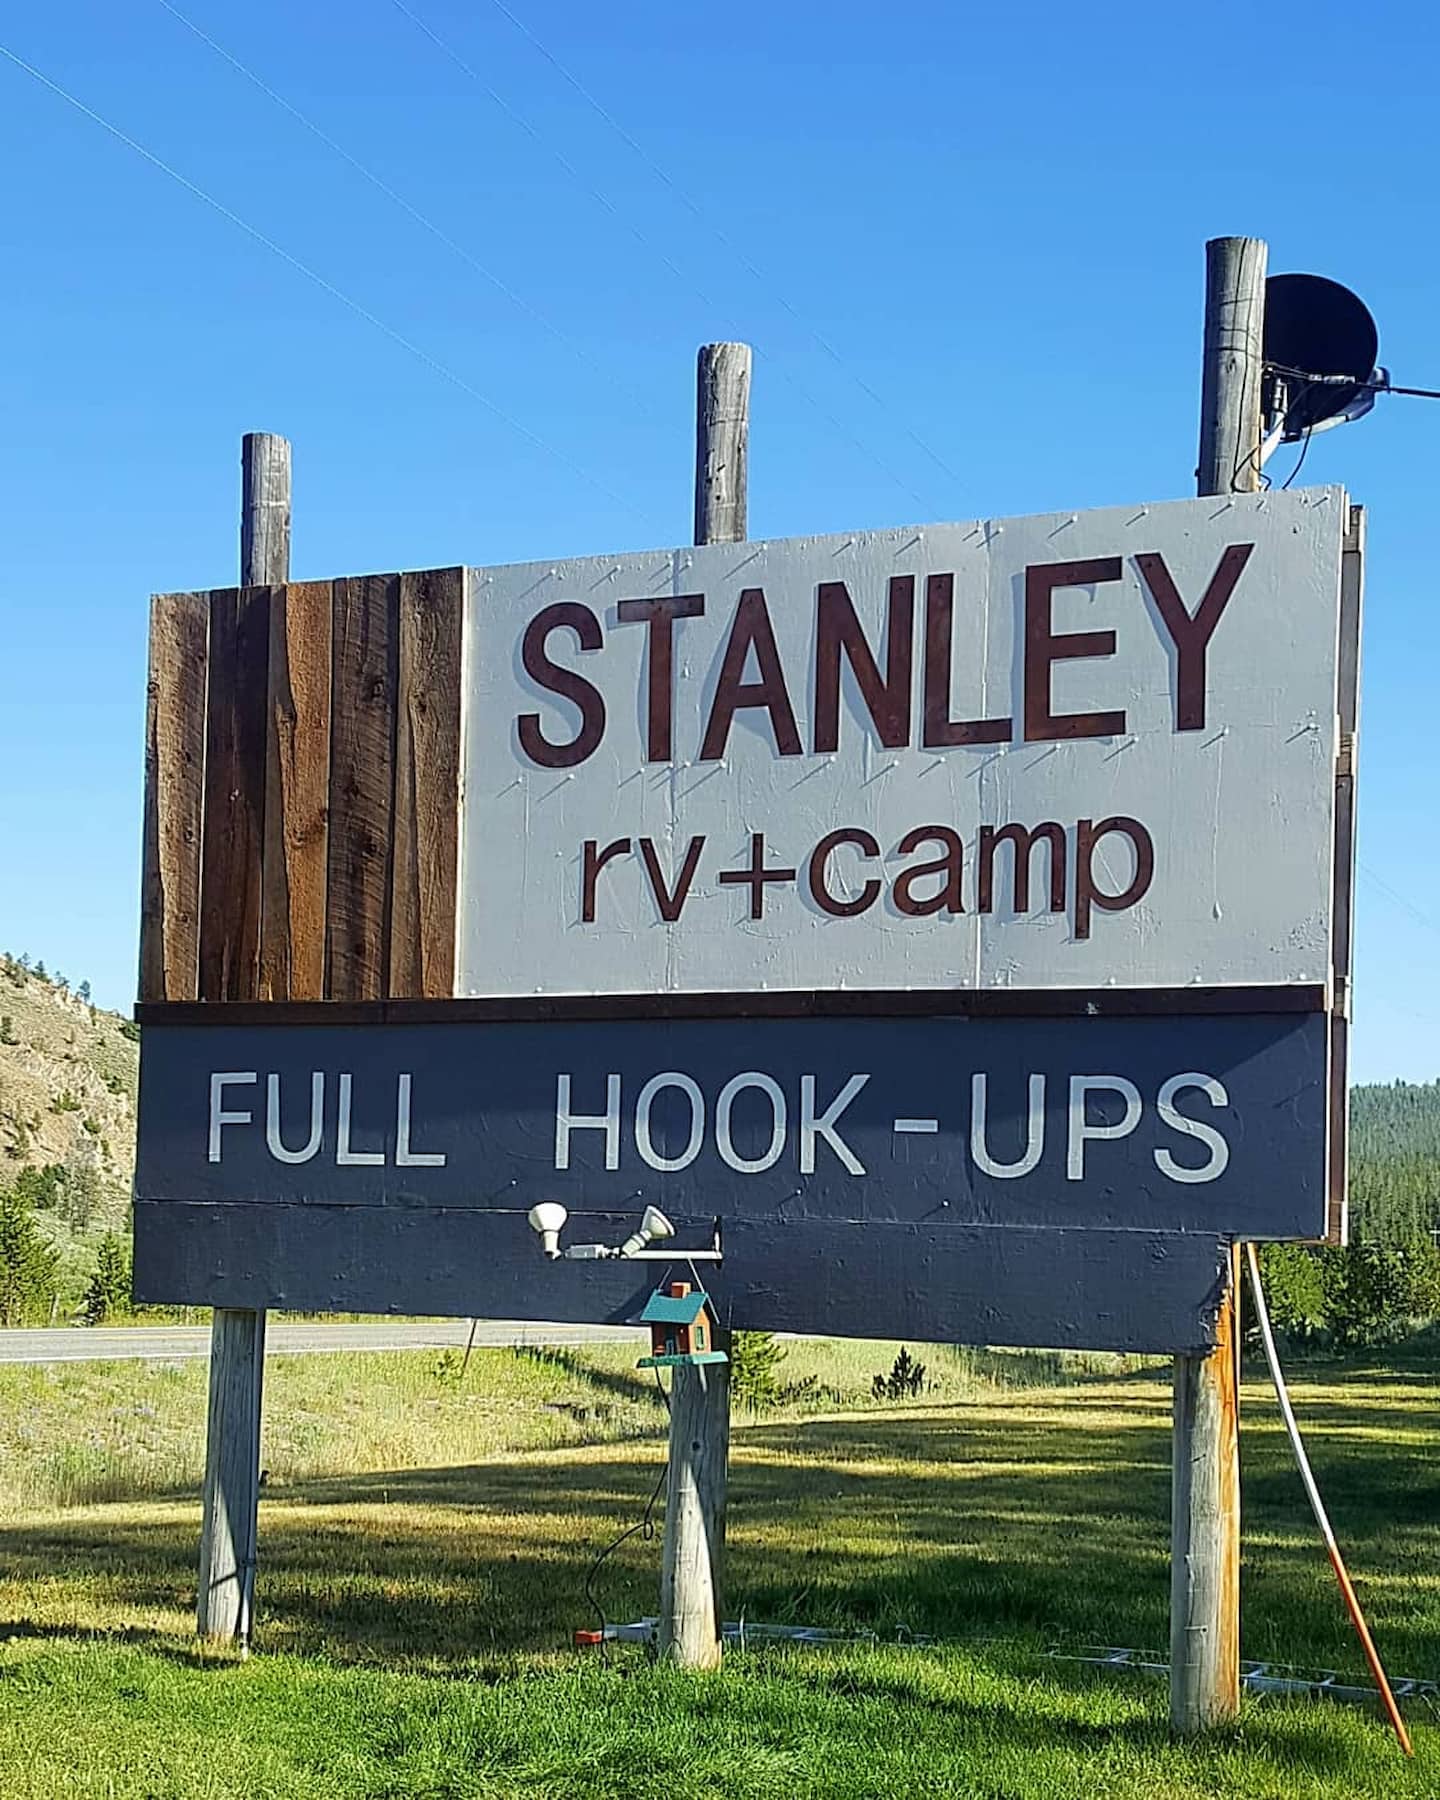 A sign for an RV park and campsite in Stanely, Idaho